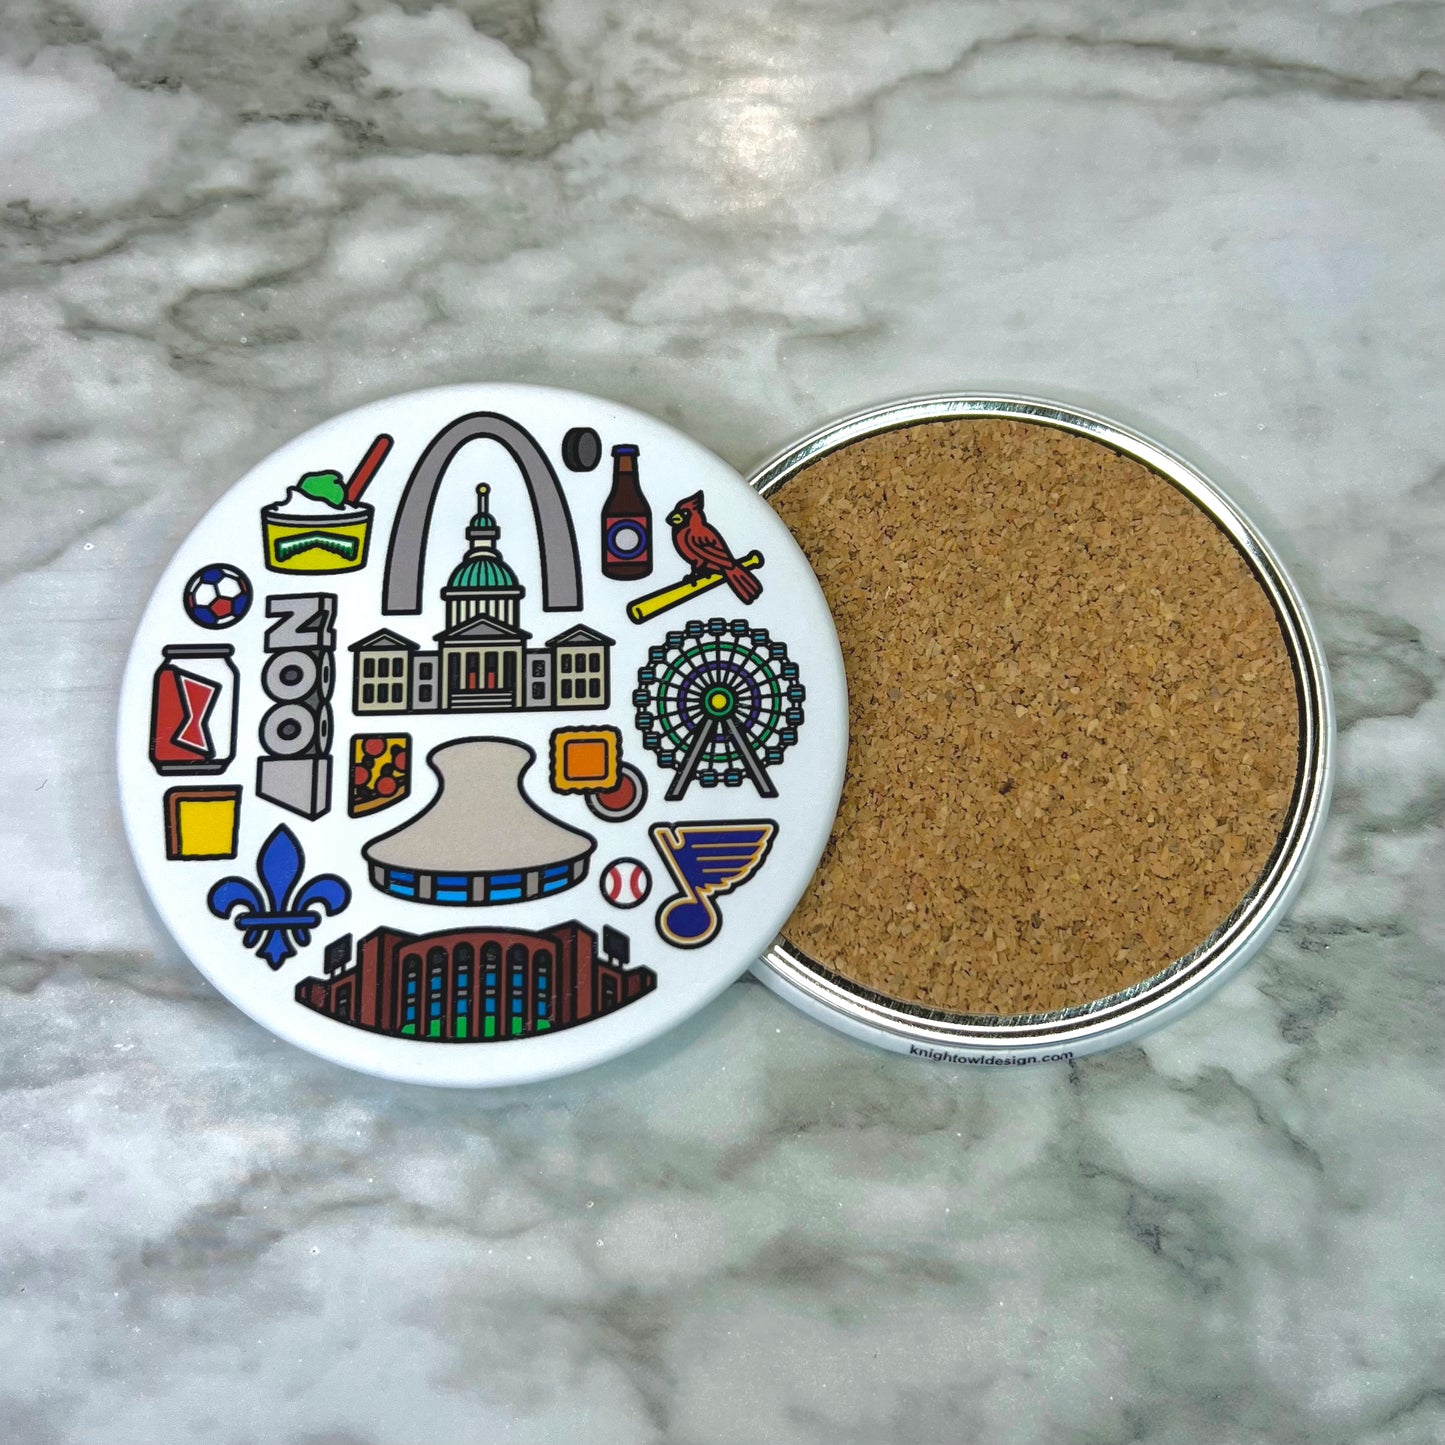 St. Louis Icons Coasters (Set of 2)